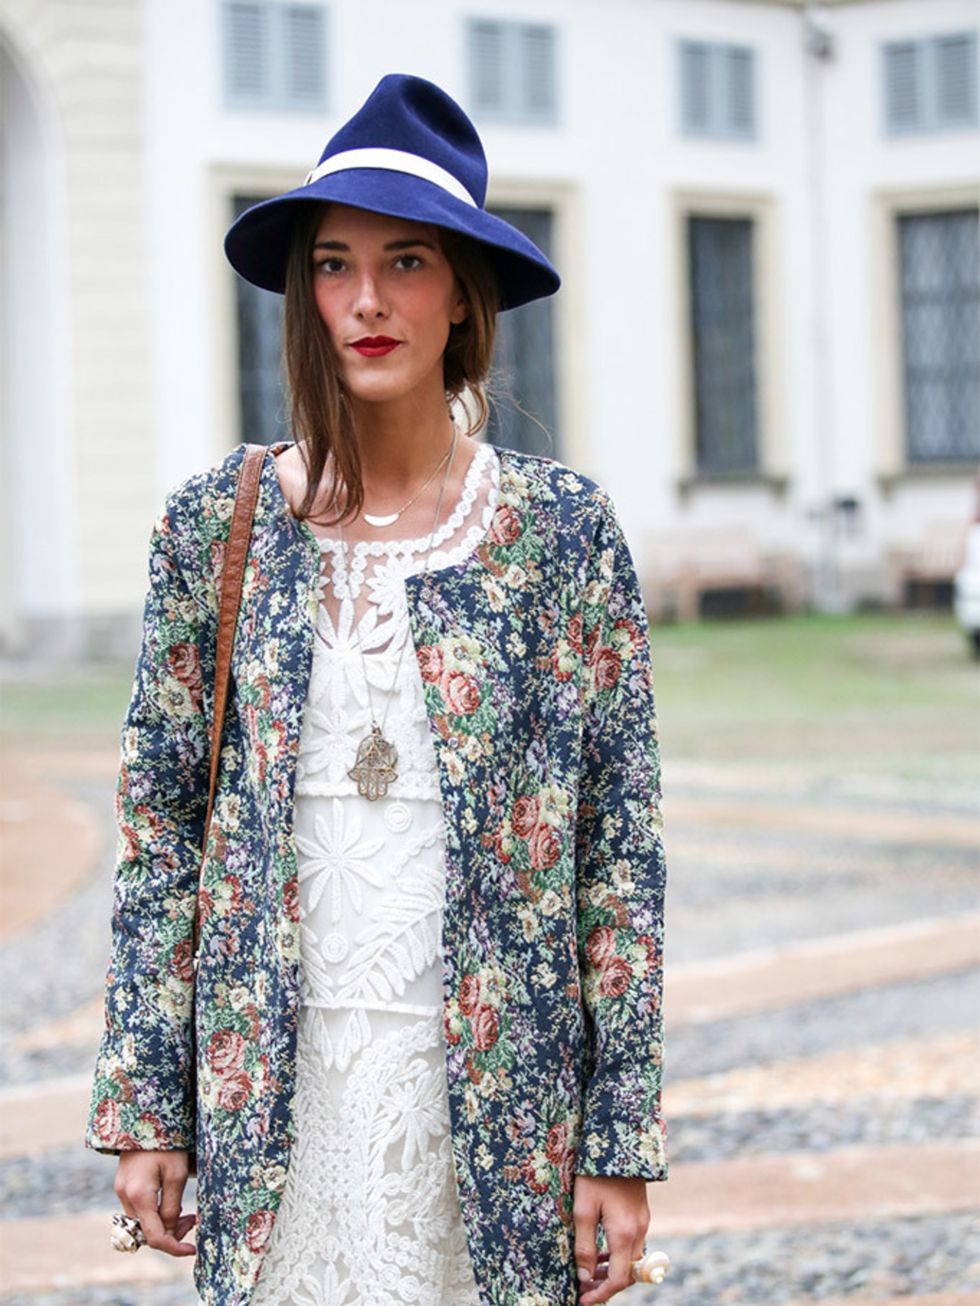 Martina wears Molly dress, vintage hat, jacket from her boutique Noftalinam.